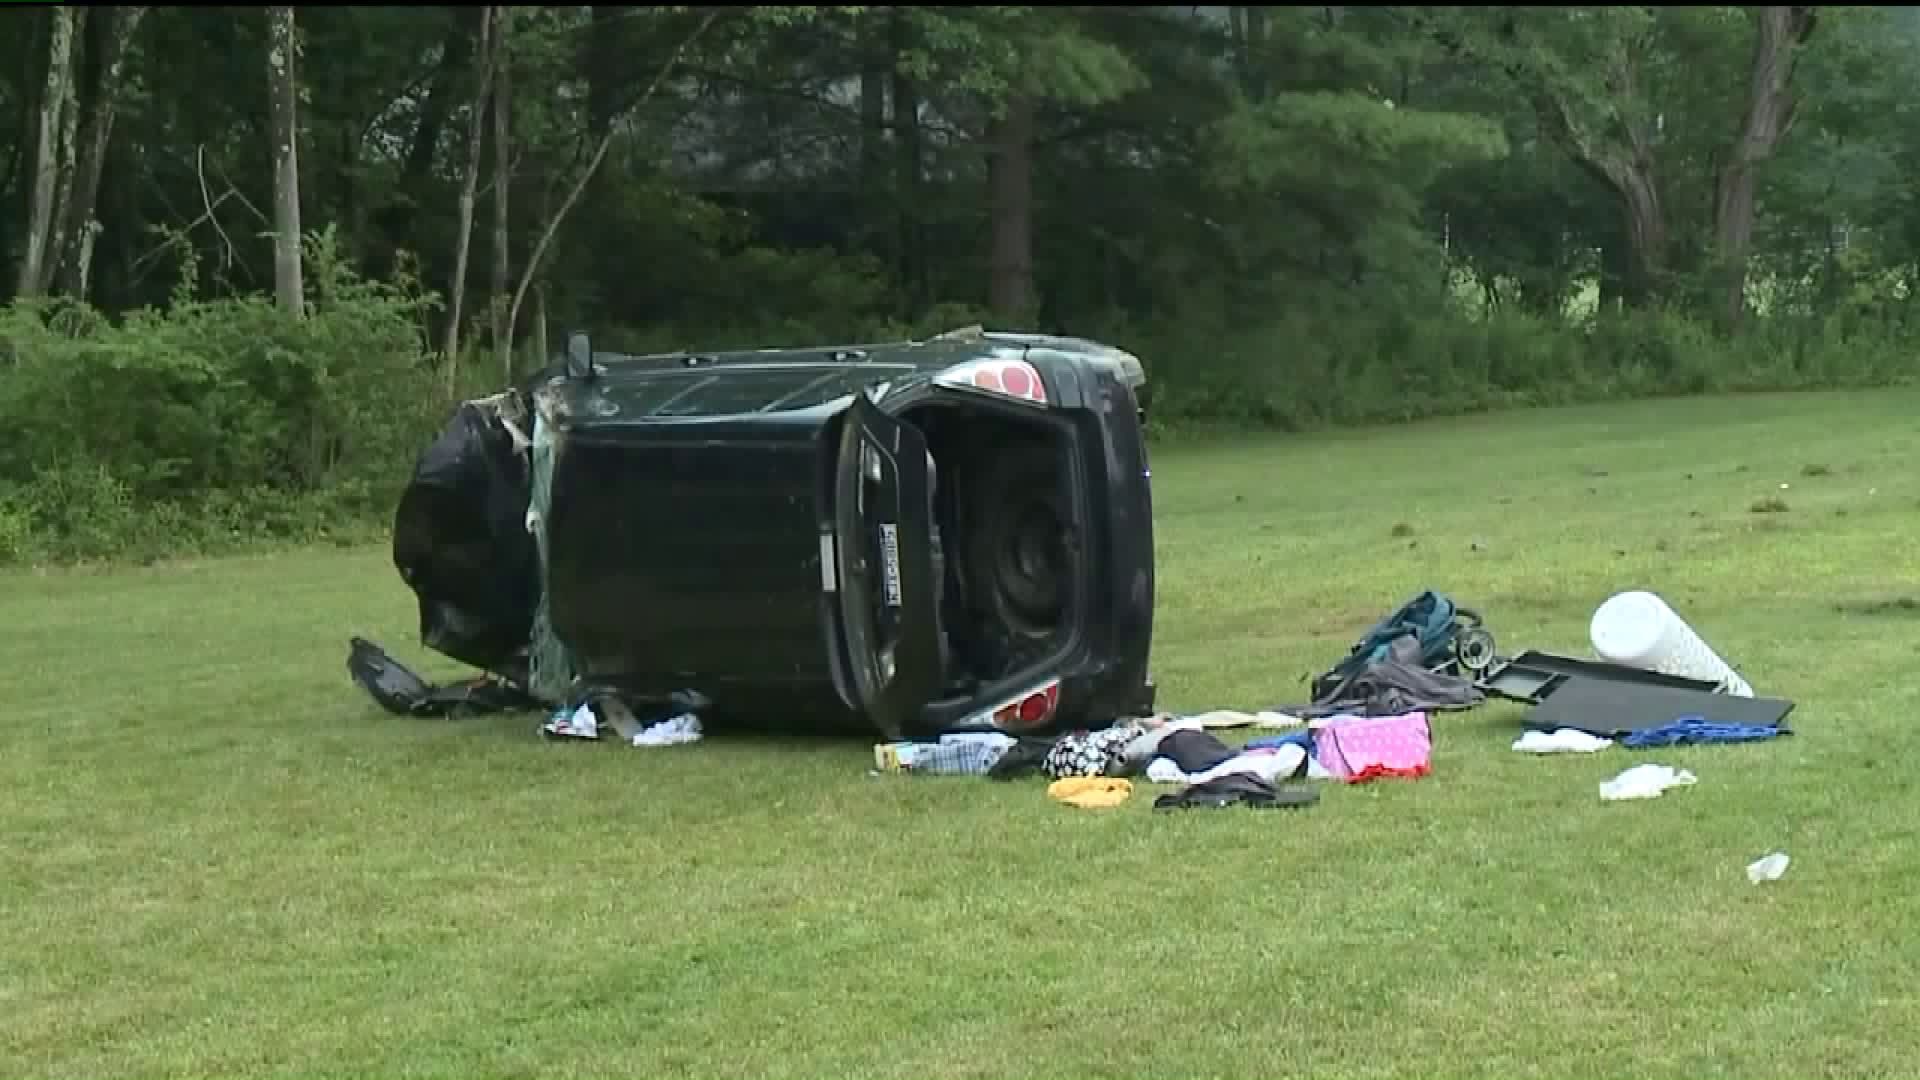 Infant Flown to Hospital After Crash in Monroe County